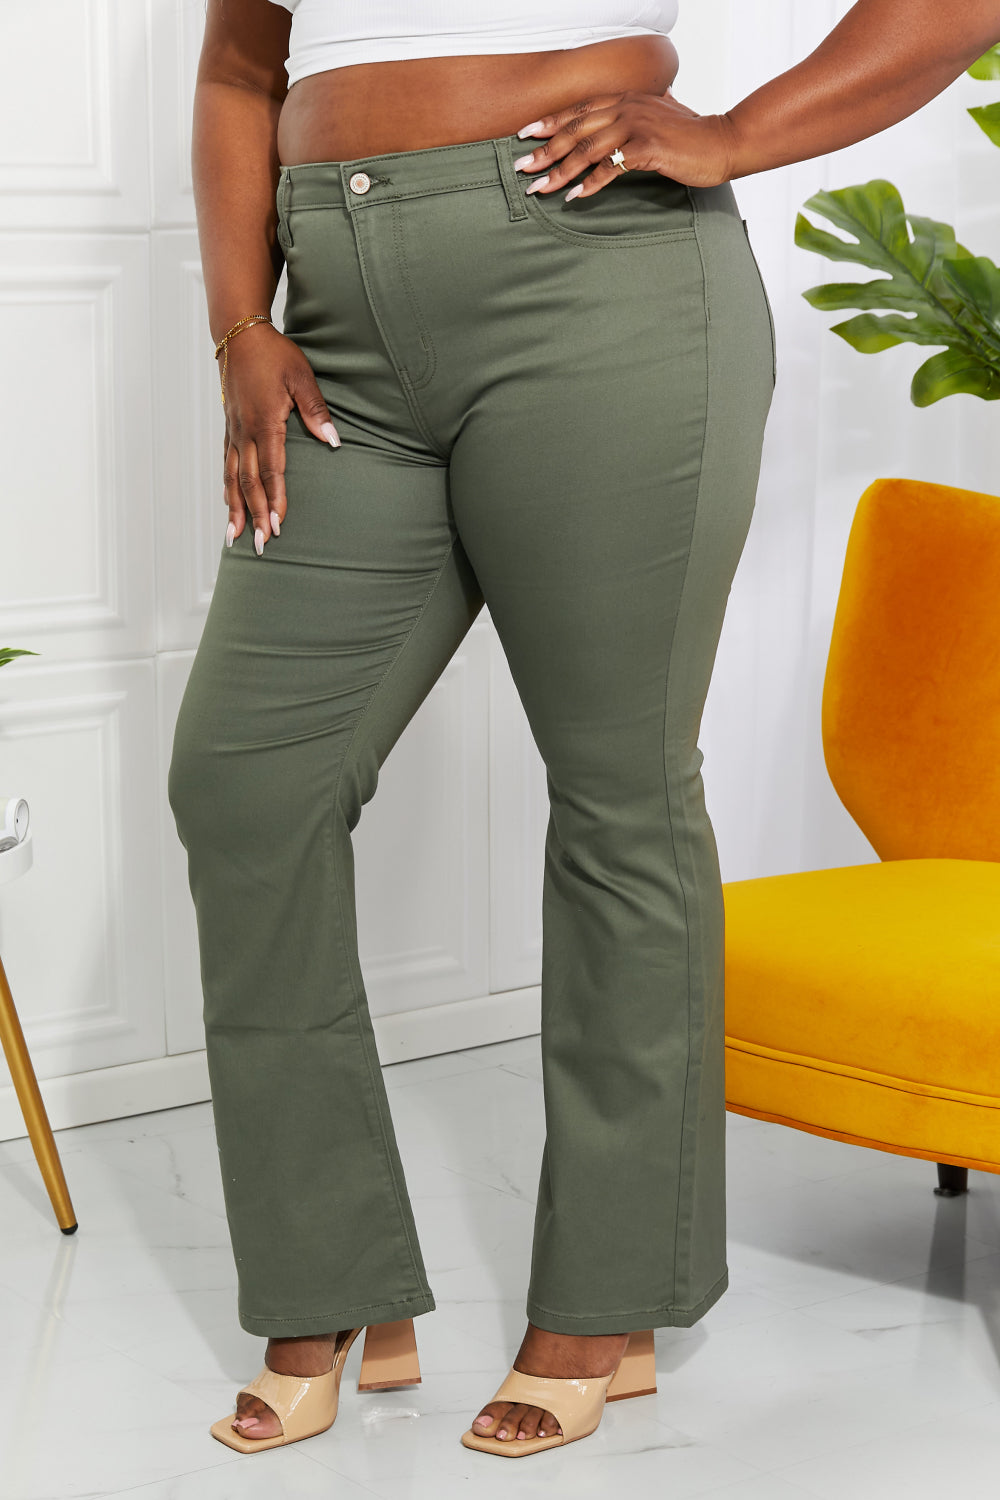 Clementine High-Rise Bootcut Jeans in Olive-Modish Lily, Tecumseh Michigan